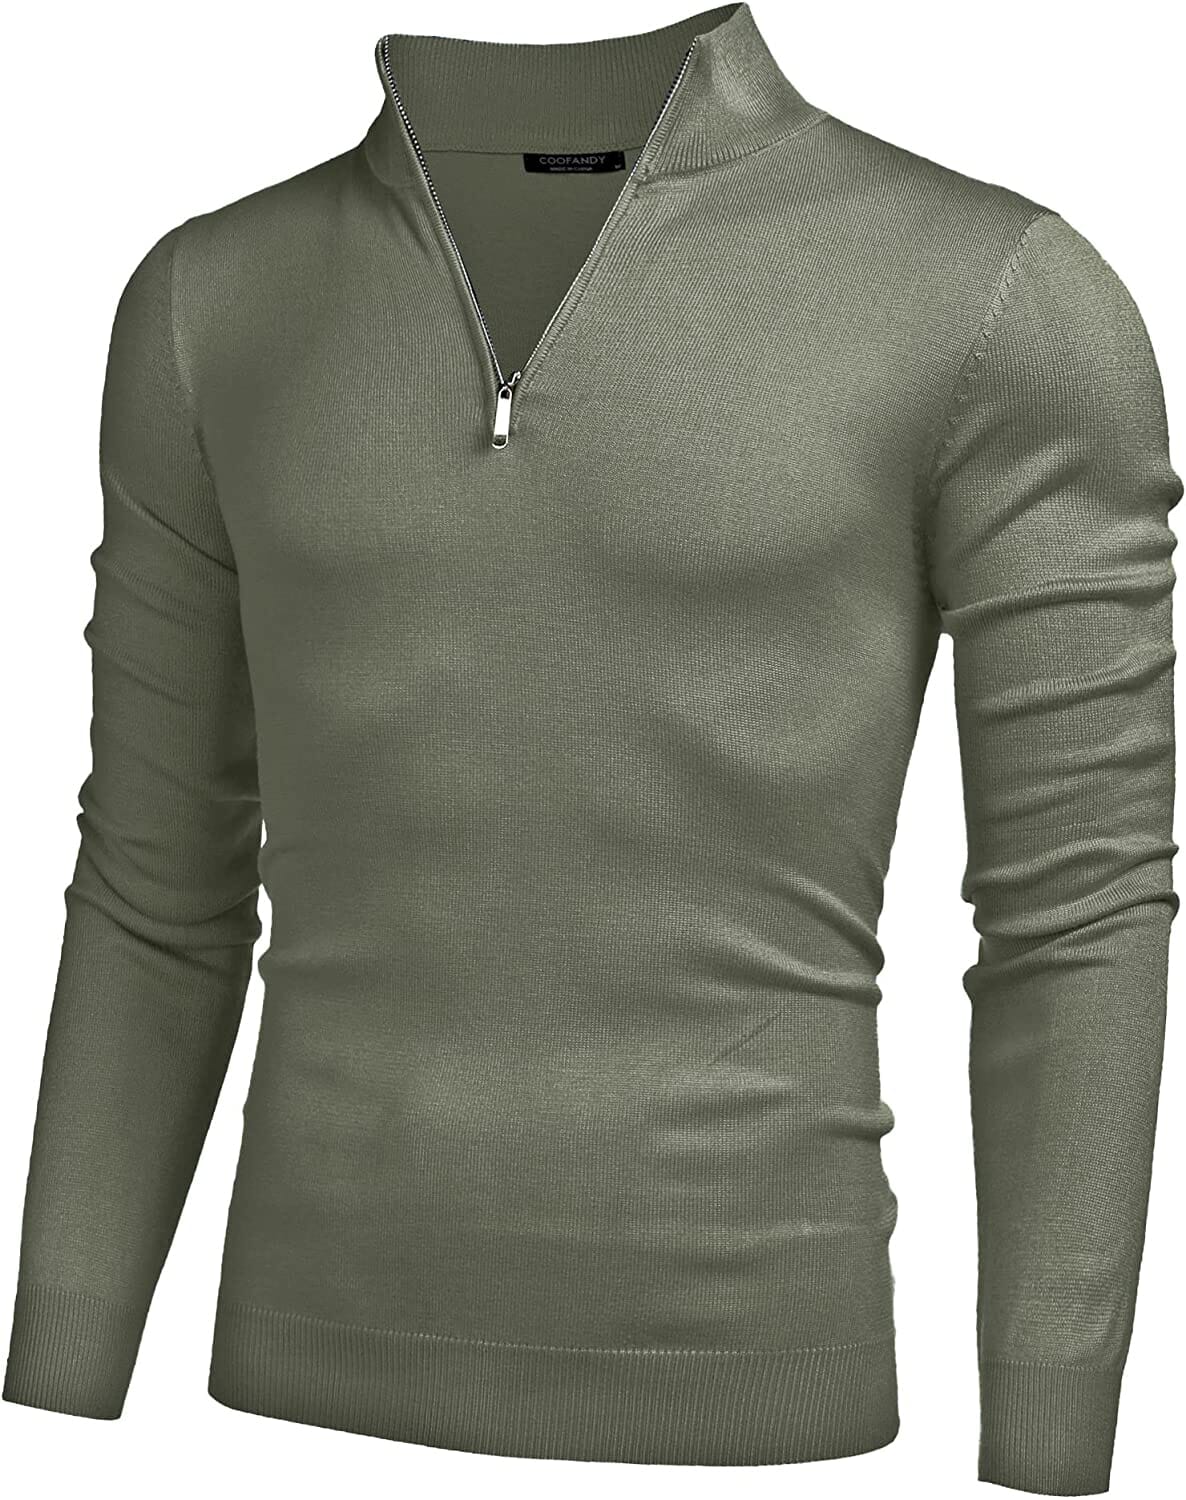 Zip Up Slim Fit Lightweight Pullover Polo Sweater (US Only) Fashion Hoodies & Sweatshirts COOFANDY Store 